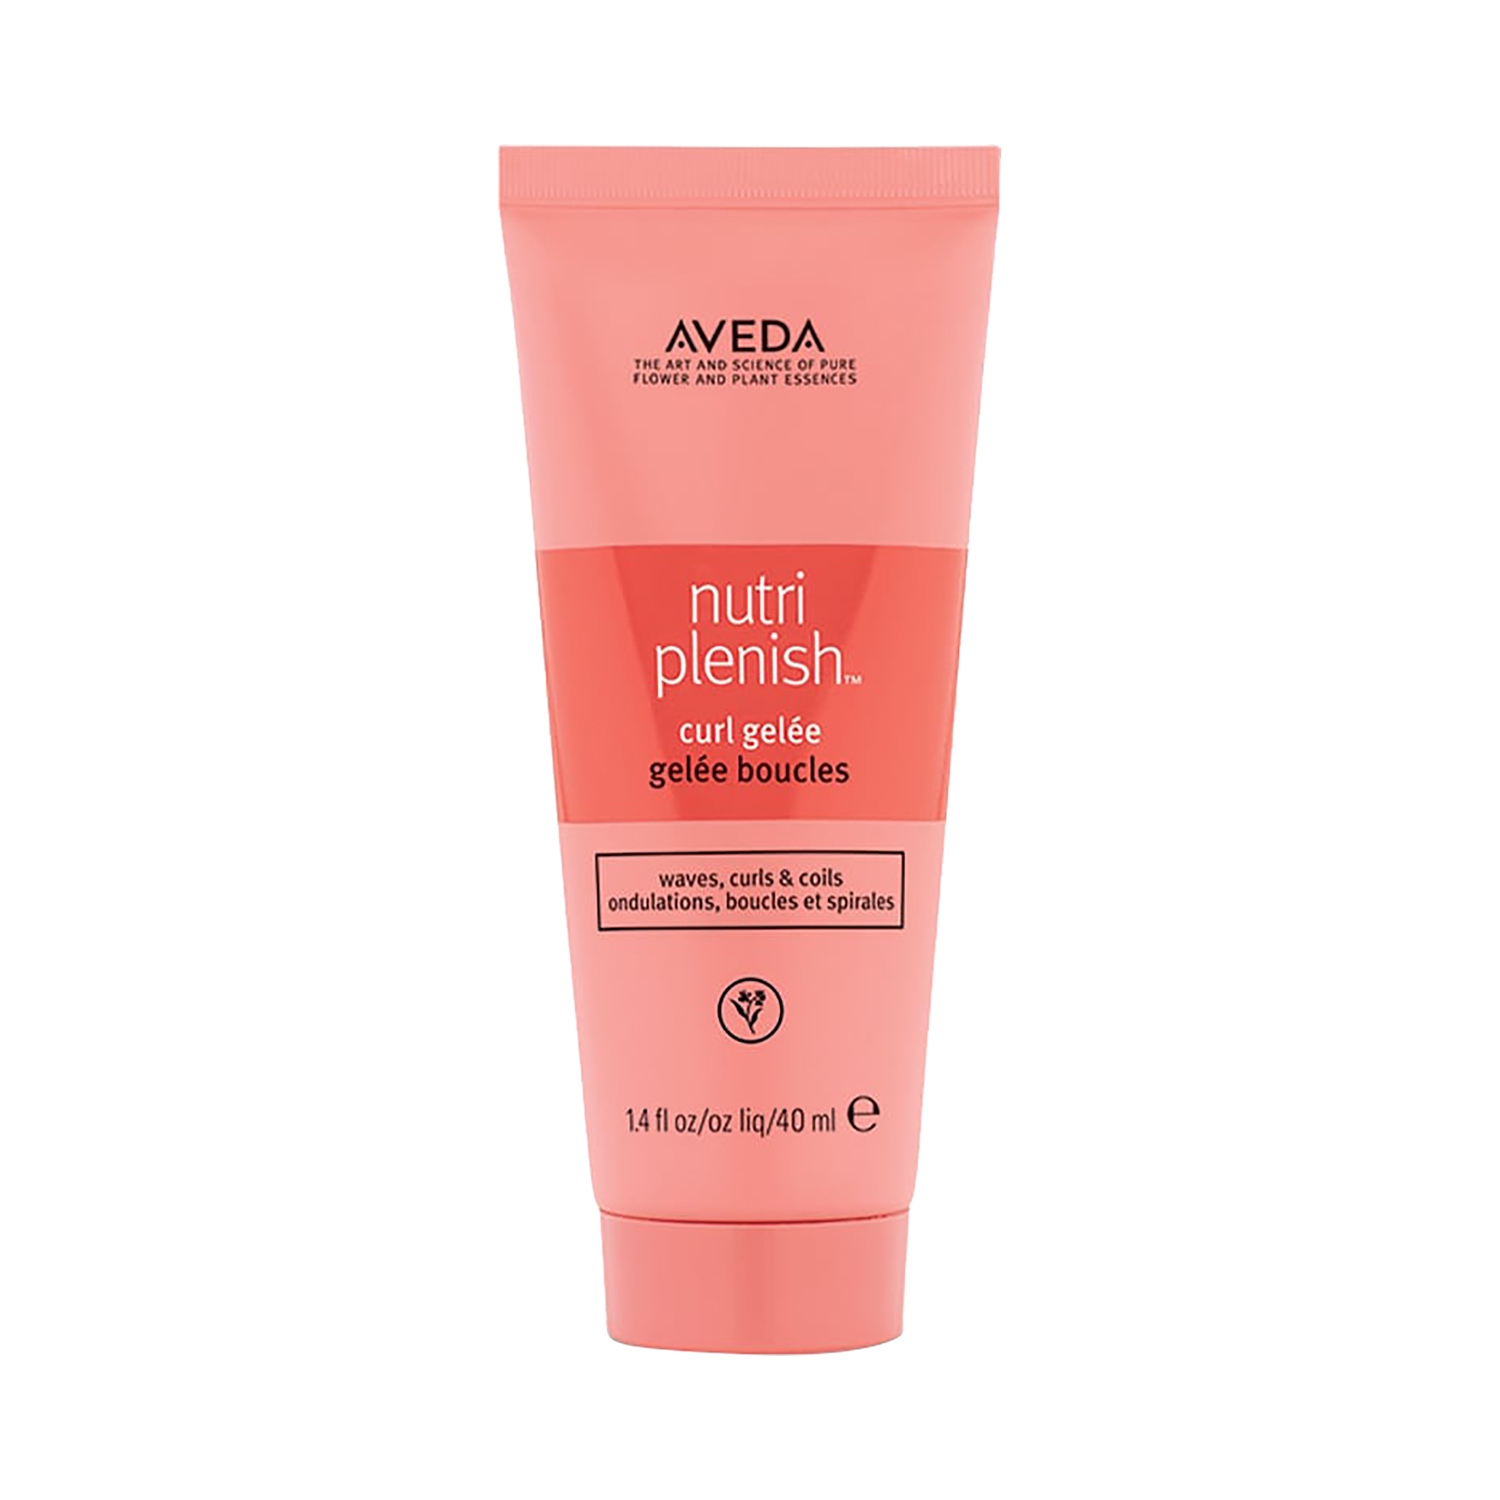 Aveda | Aveda Nutriplenish Curl Gelee For Curly Hair Travel Size (40ml)